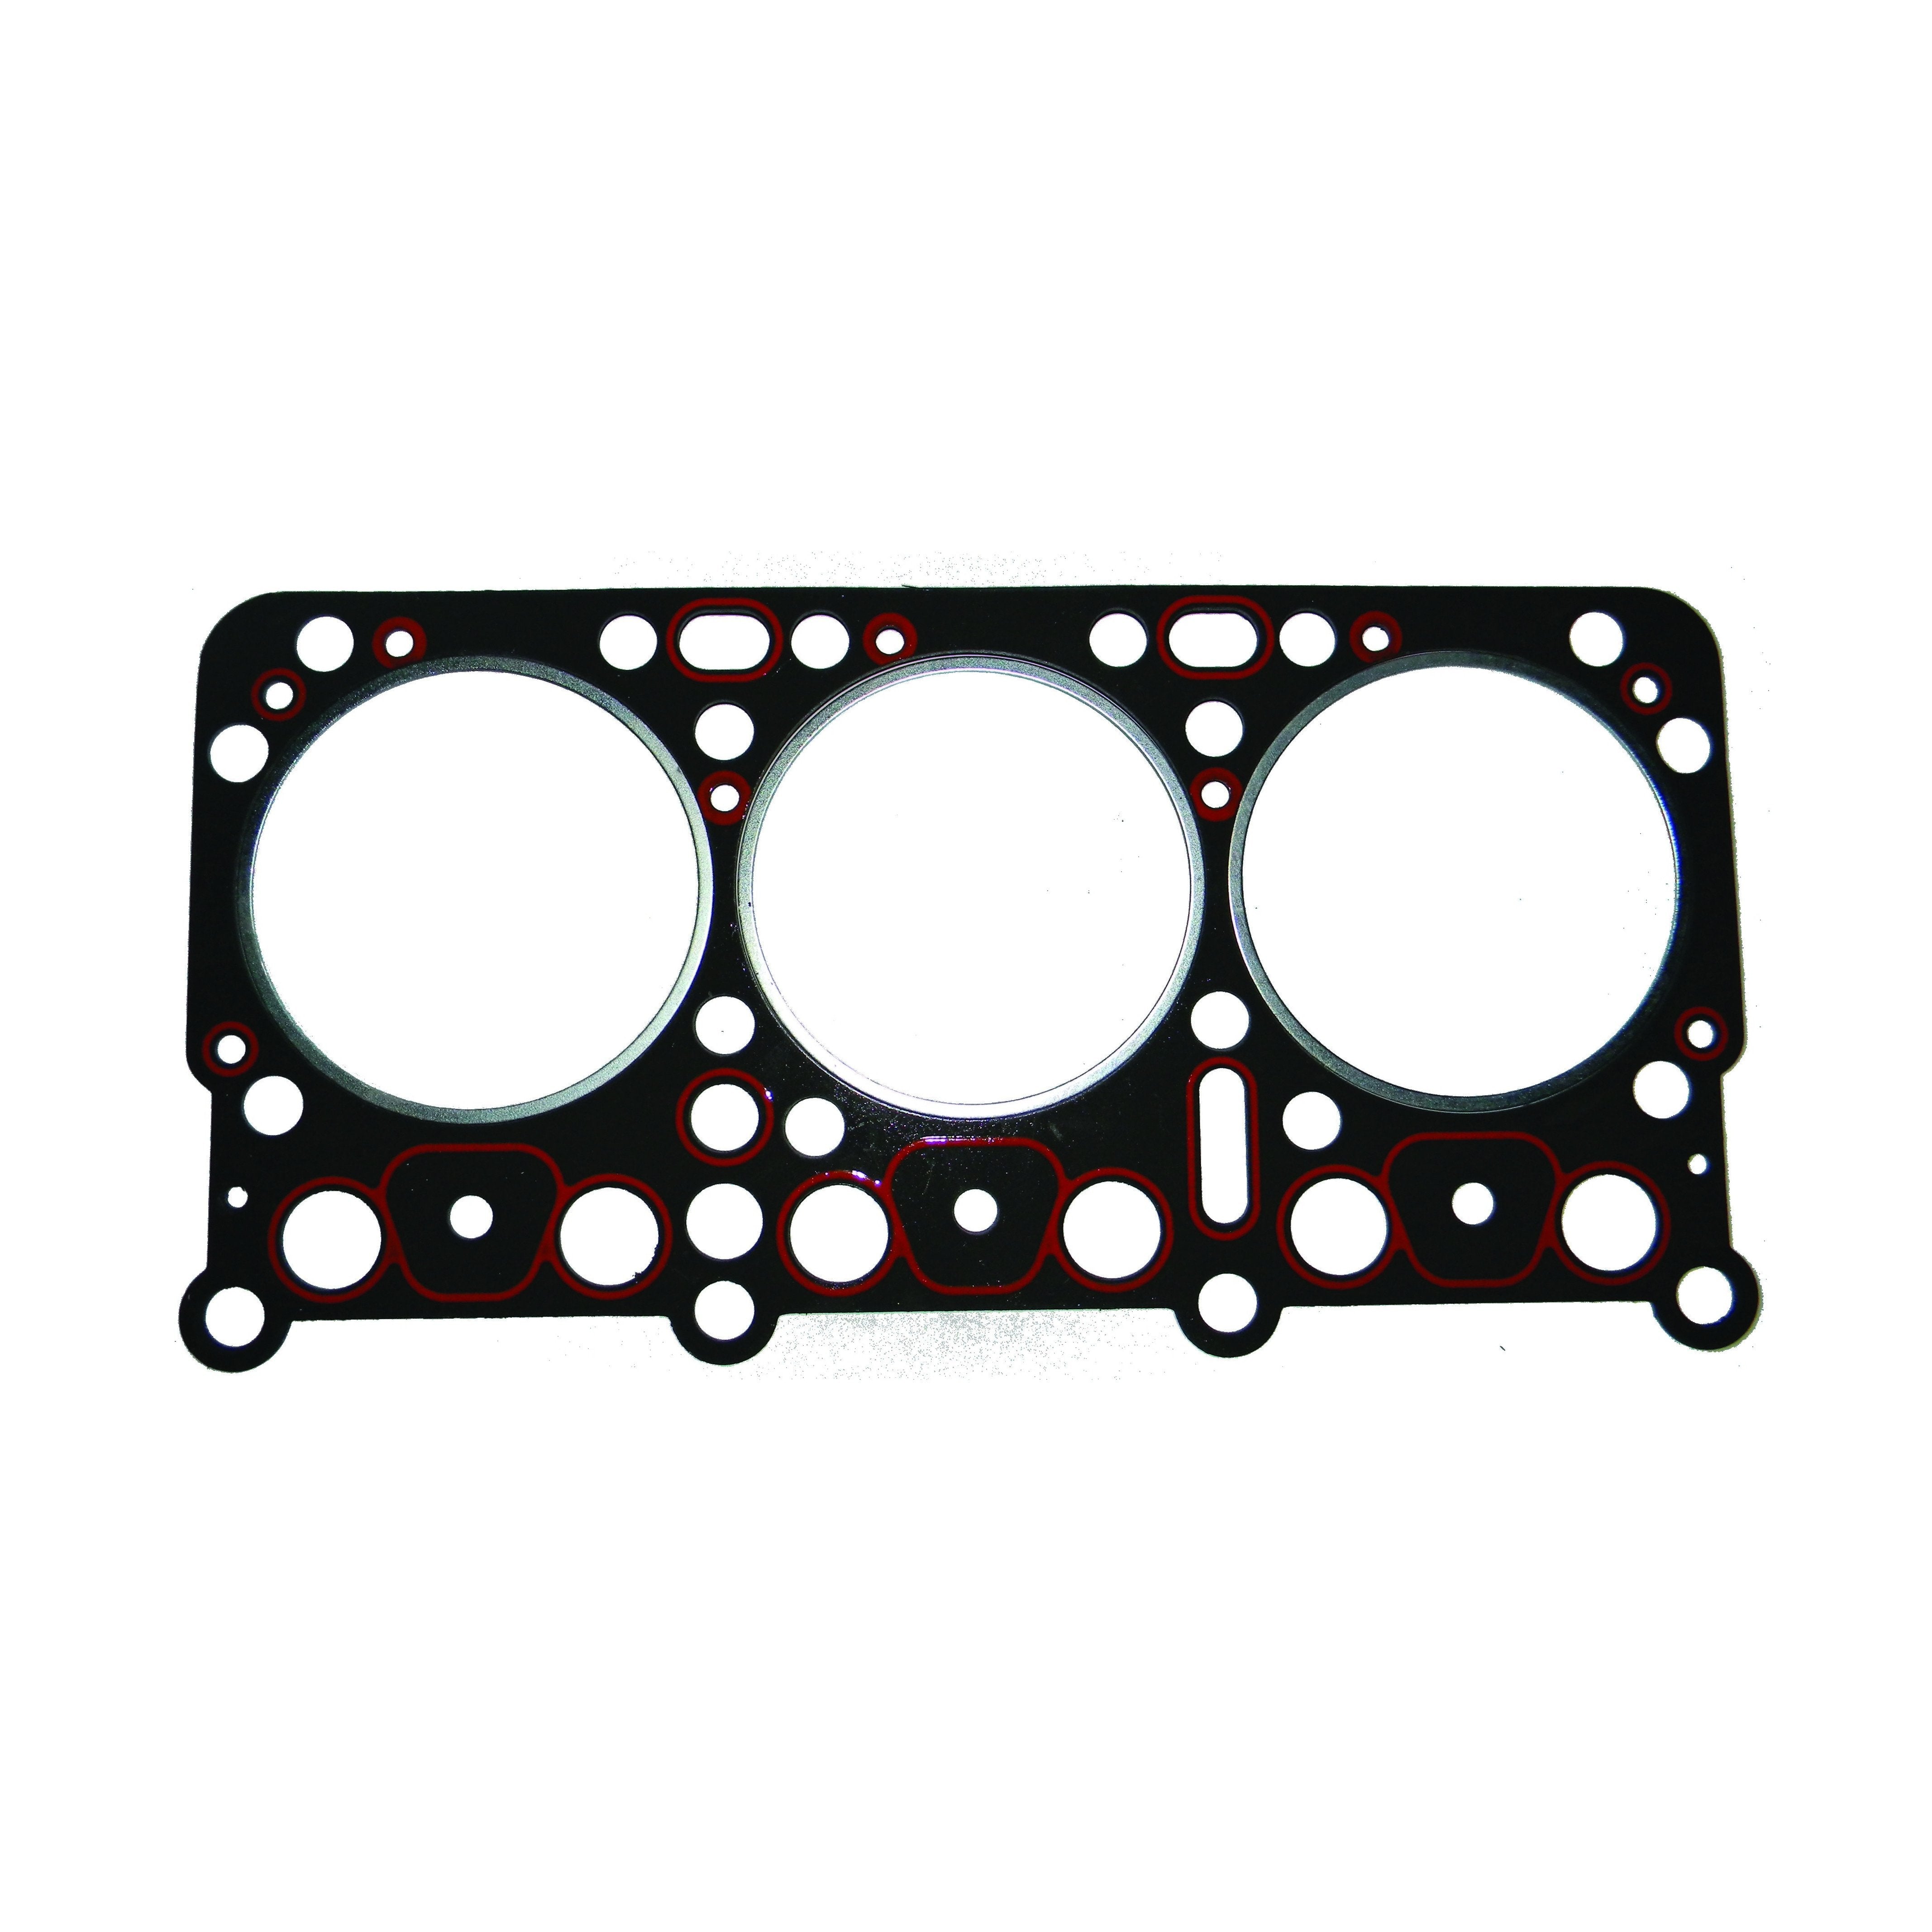 F010001 | KIT, CYLINDER HEAD GASKET E-6 | Replace 57GC189A | EGK 